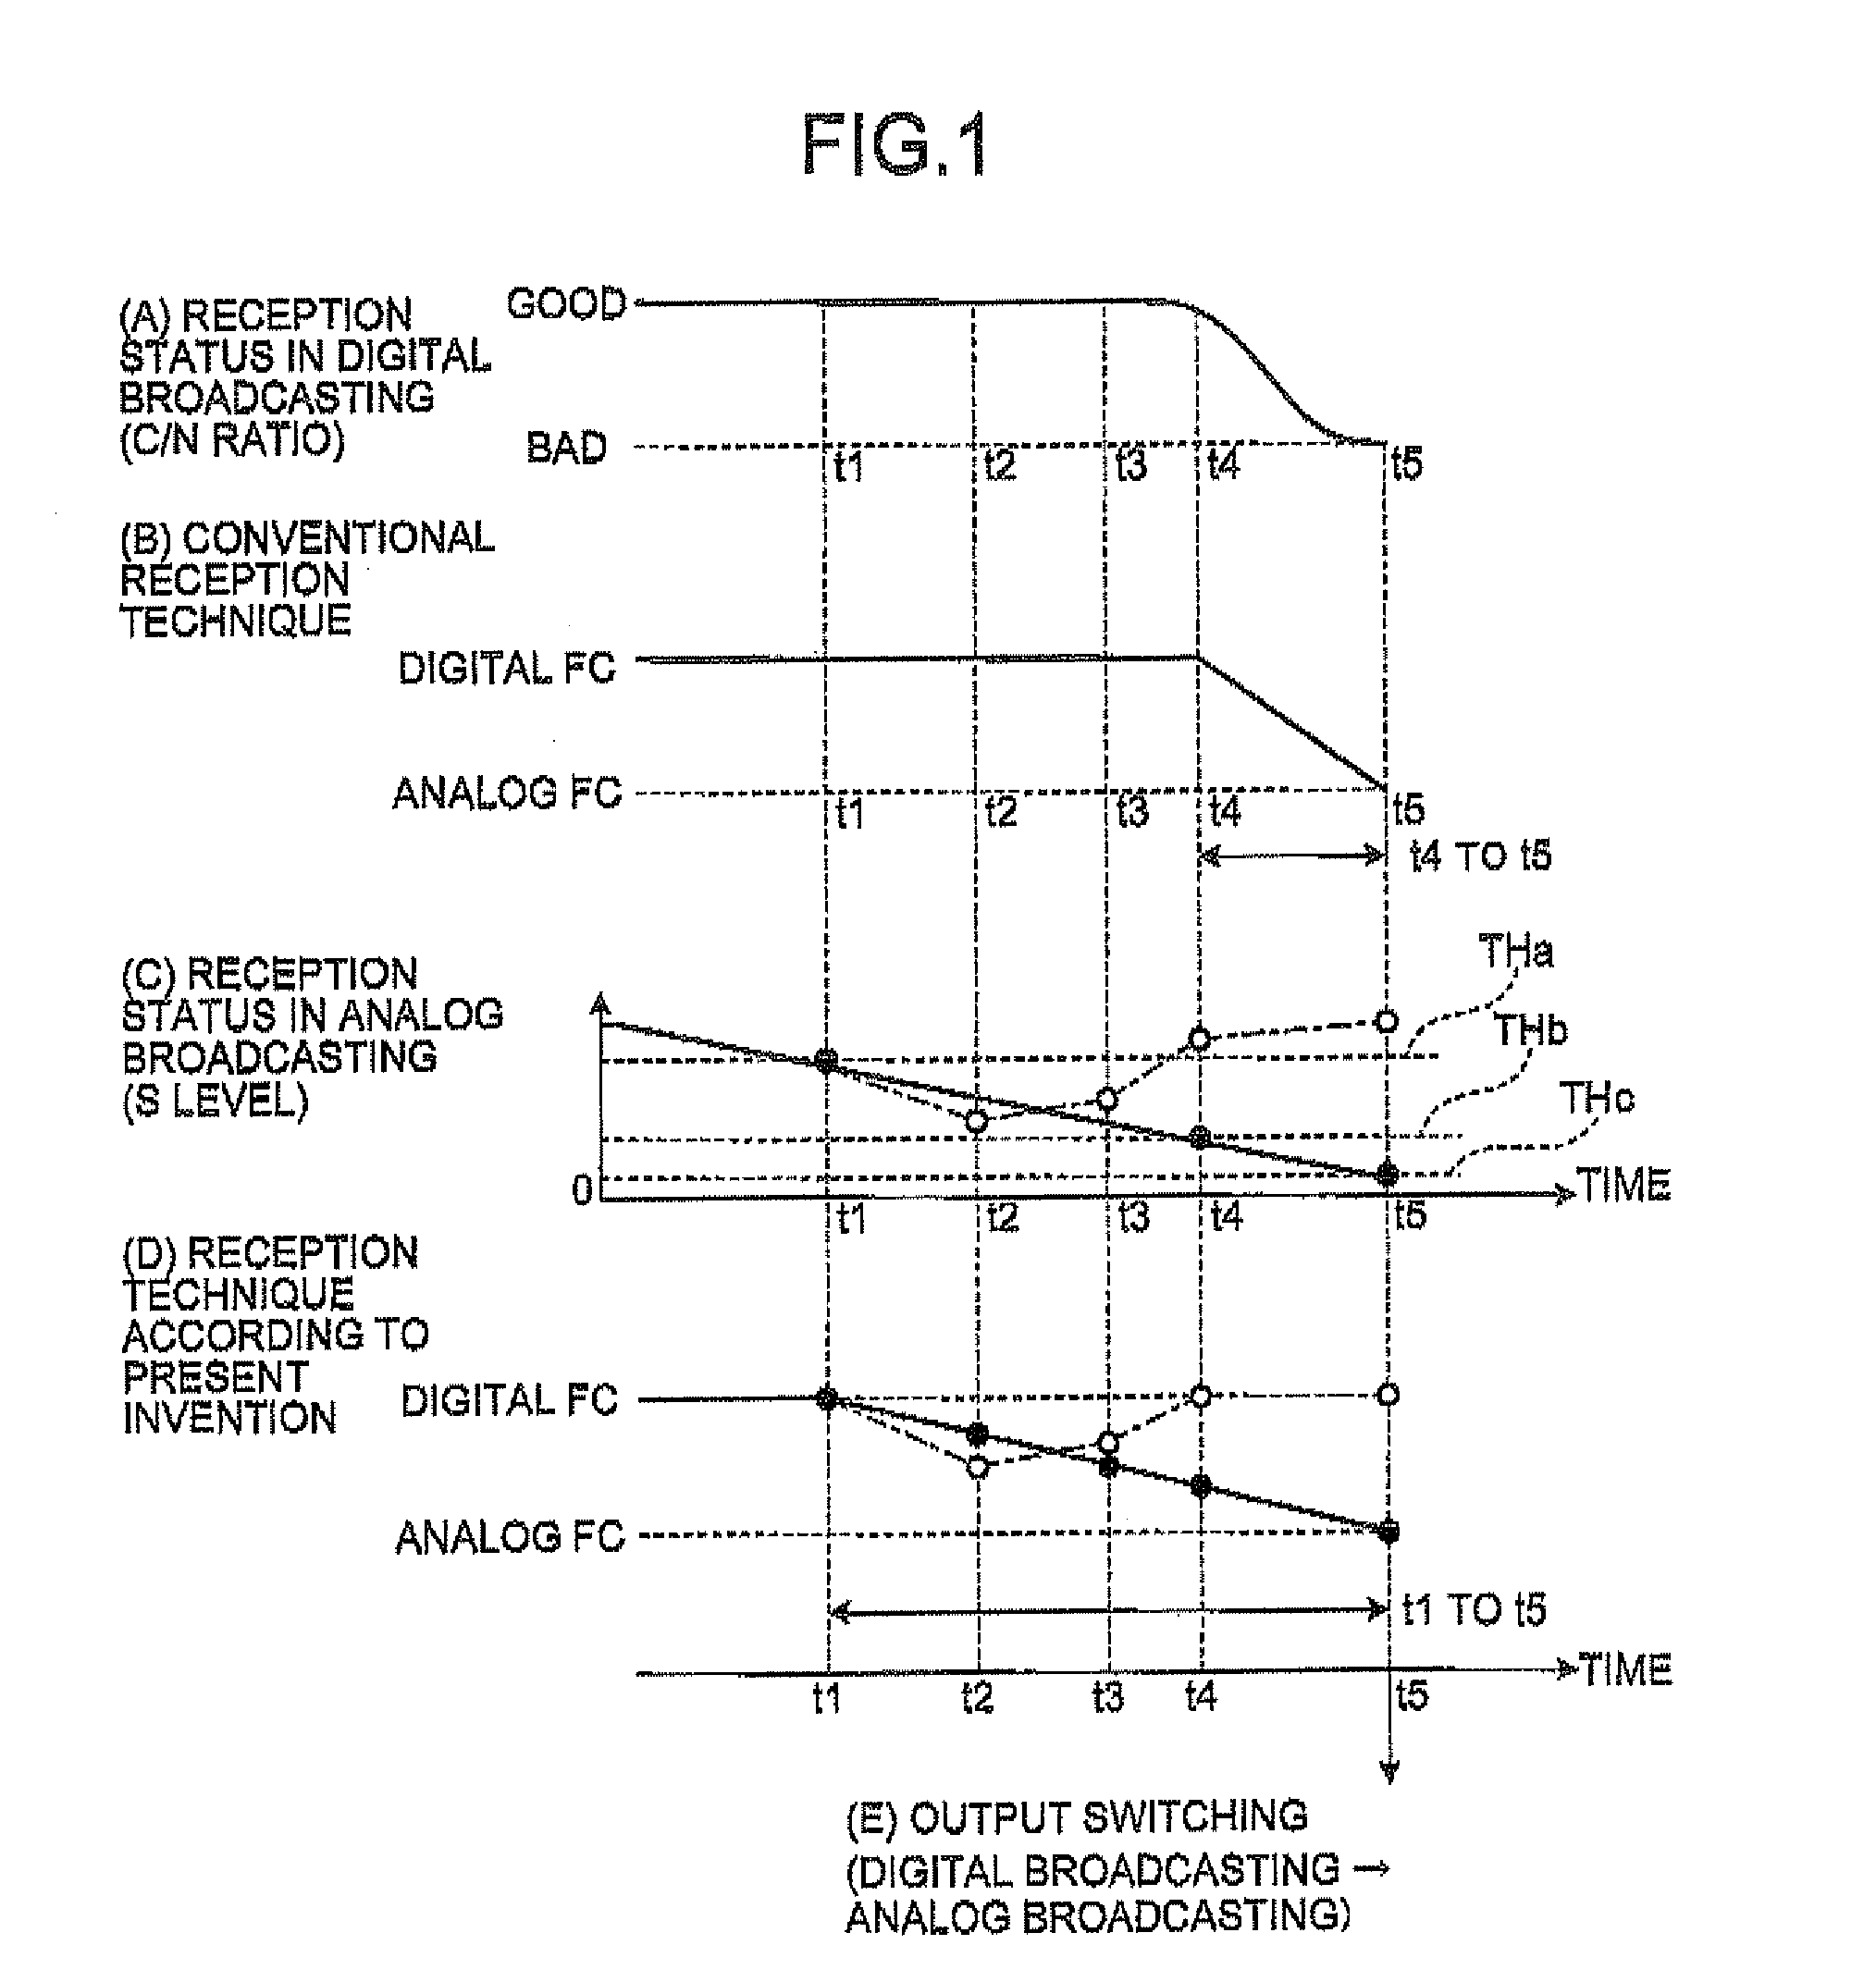 Broadcast receiving apparatus and broadcast receiving method